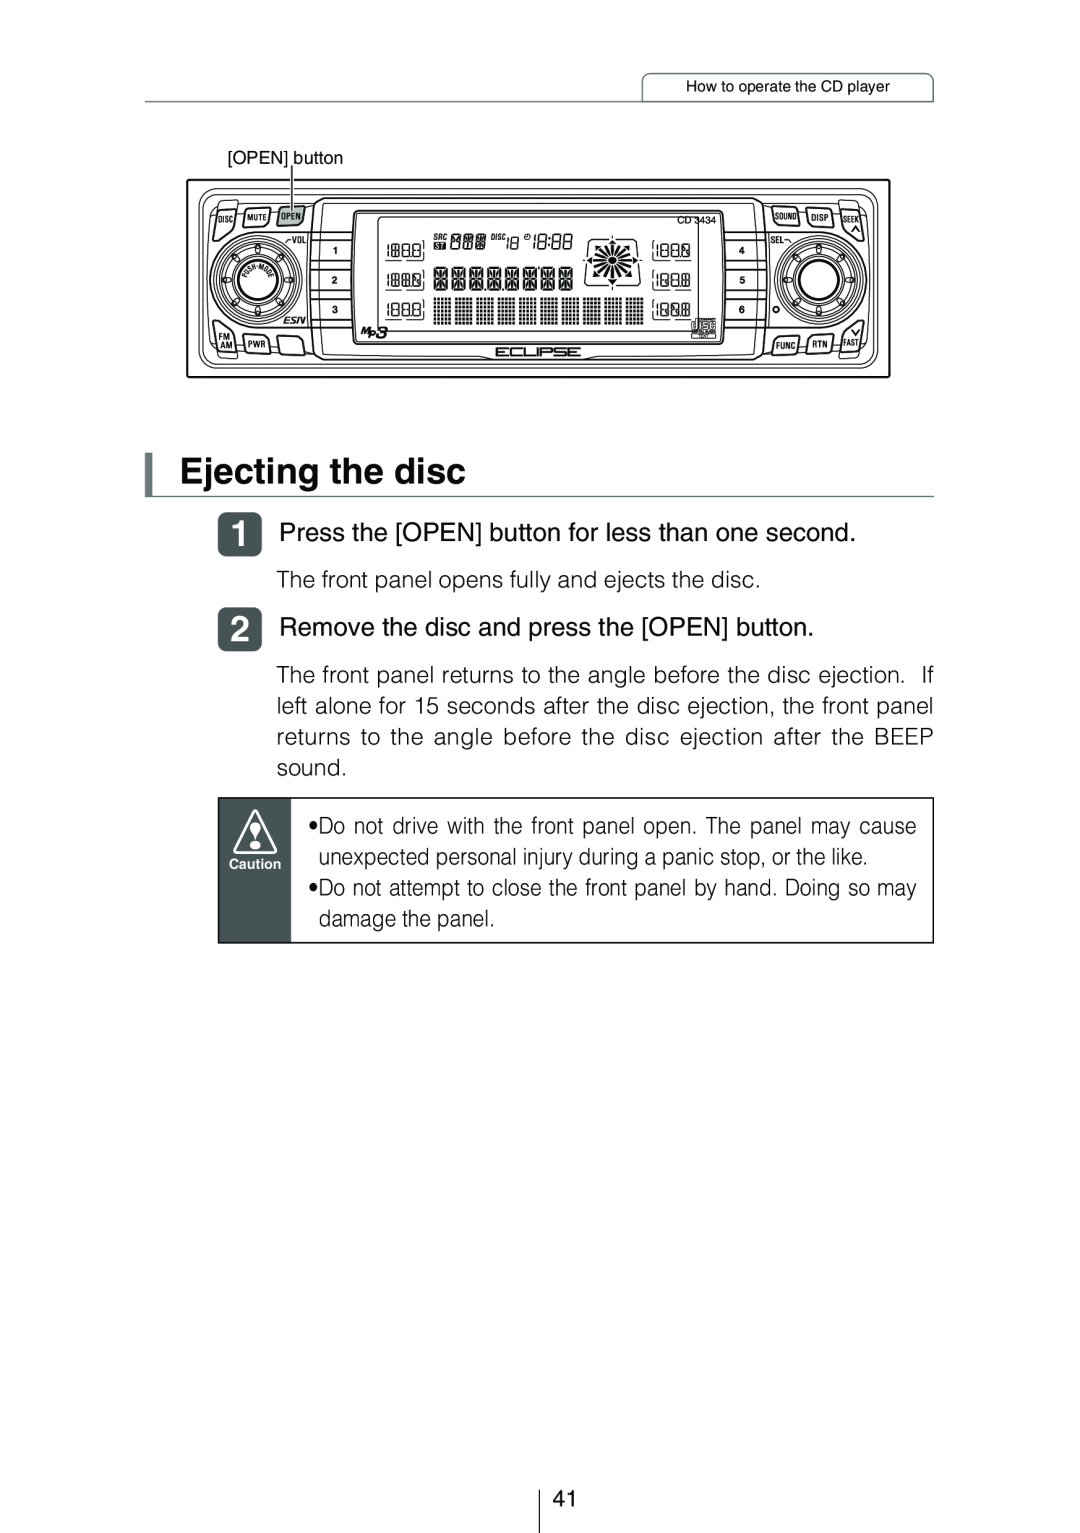 Eclipse - Fujitsu Ten CD3434 owner manual Ejecting the disc, Press the OPEN button for less than one second 